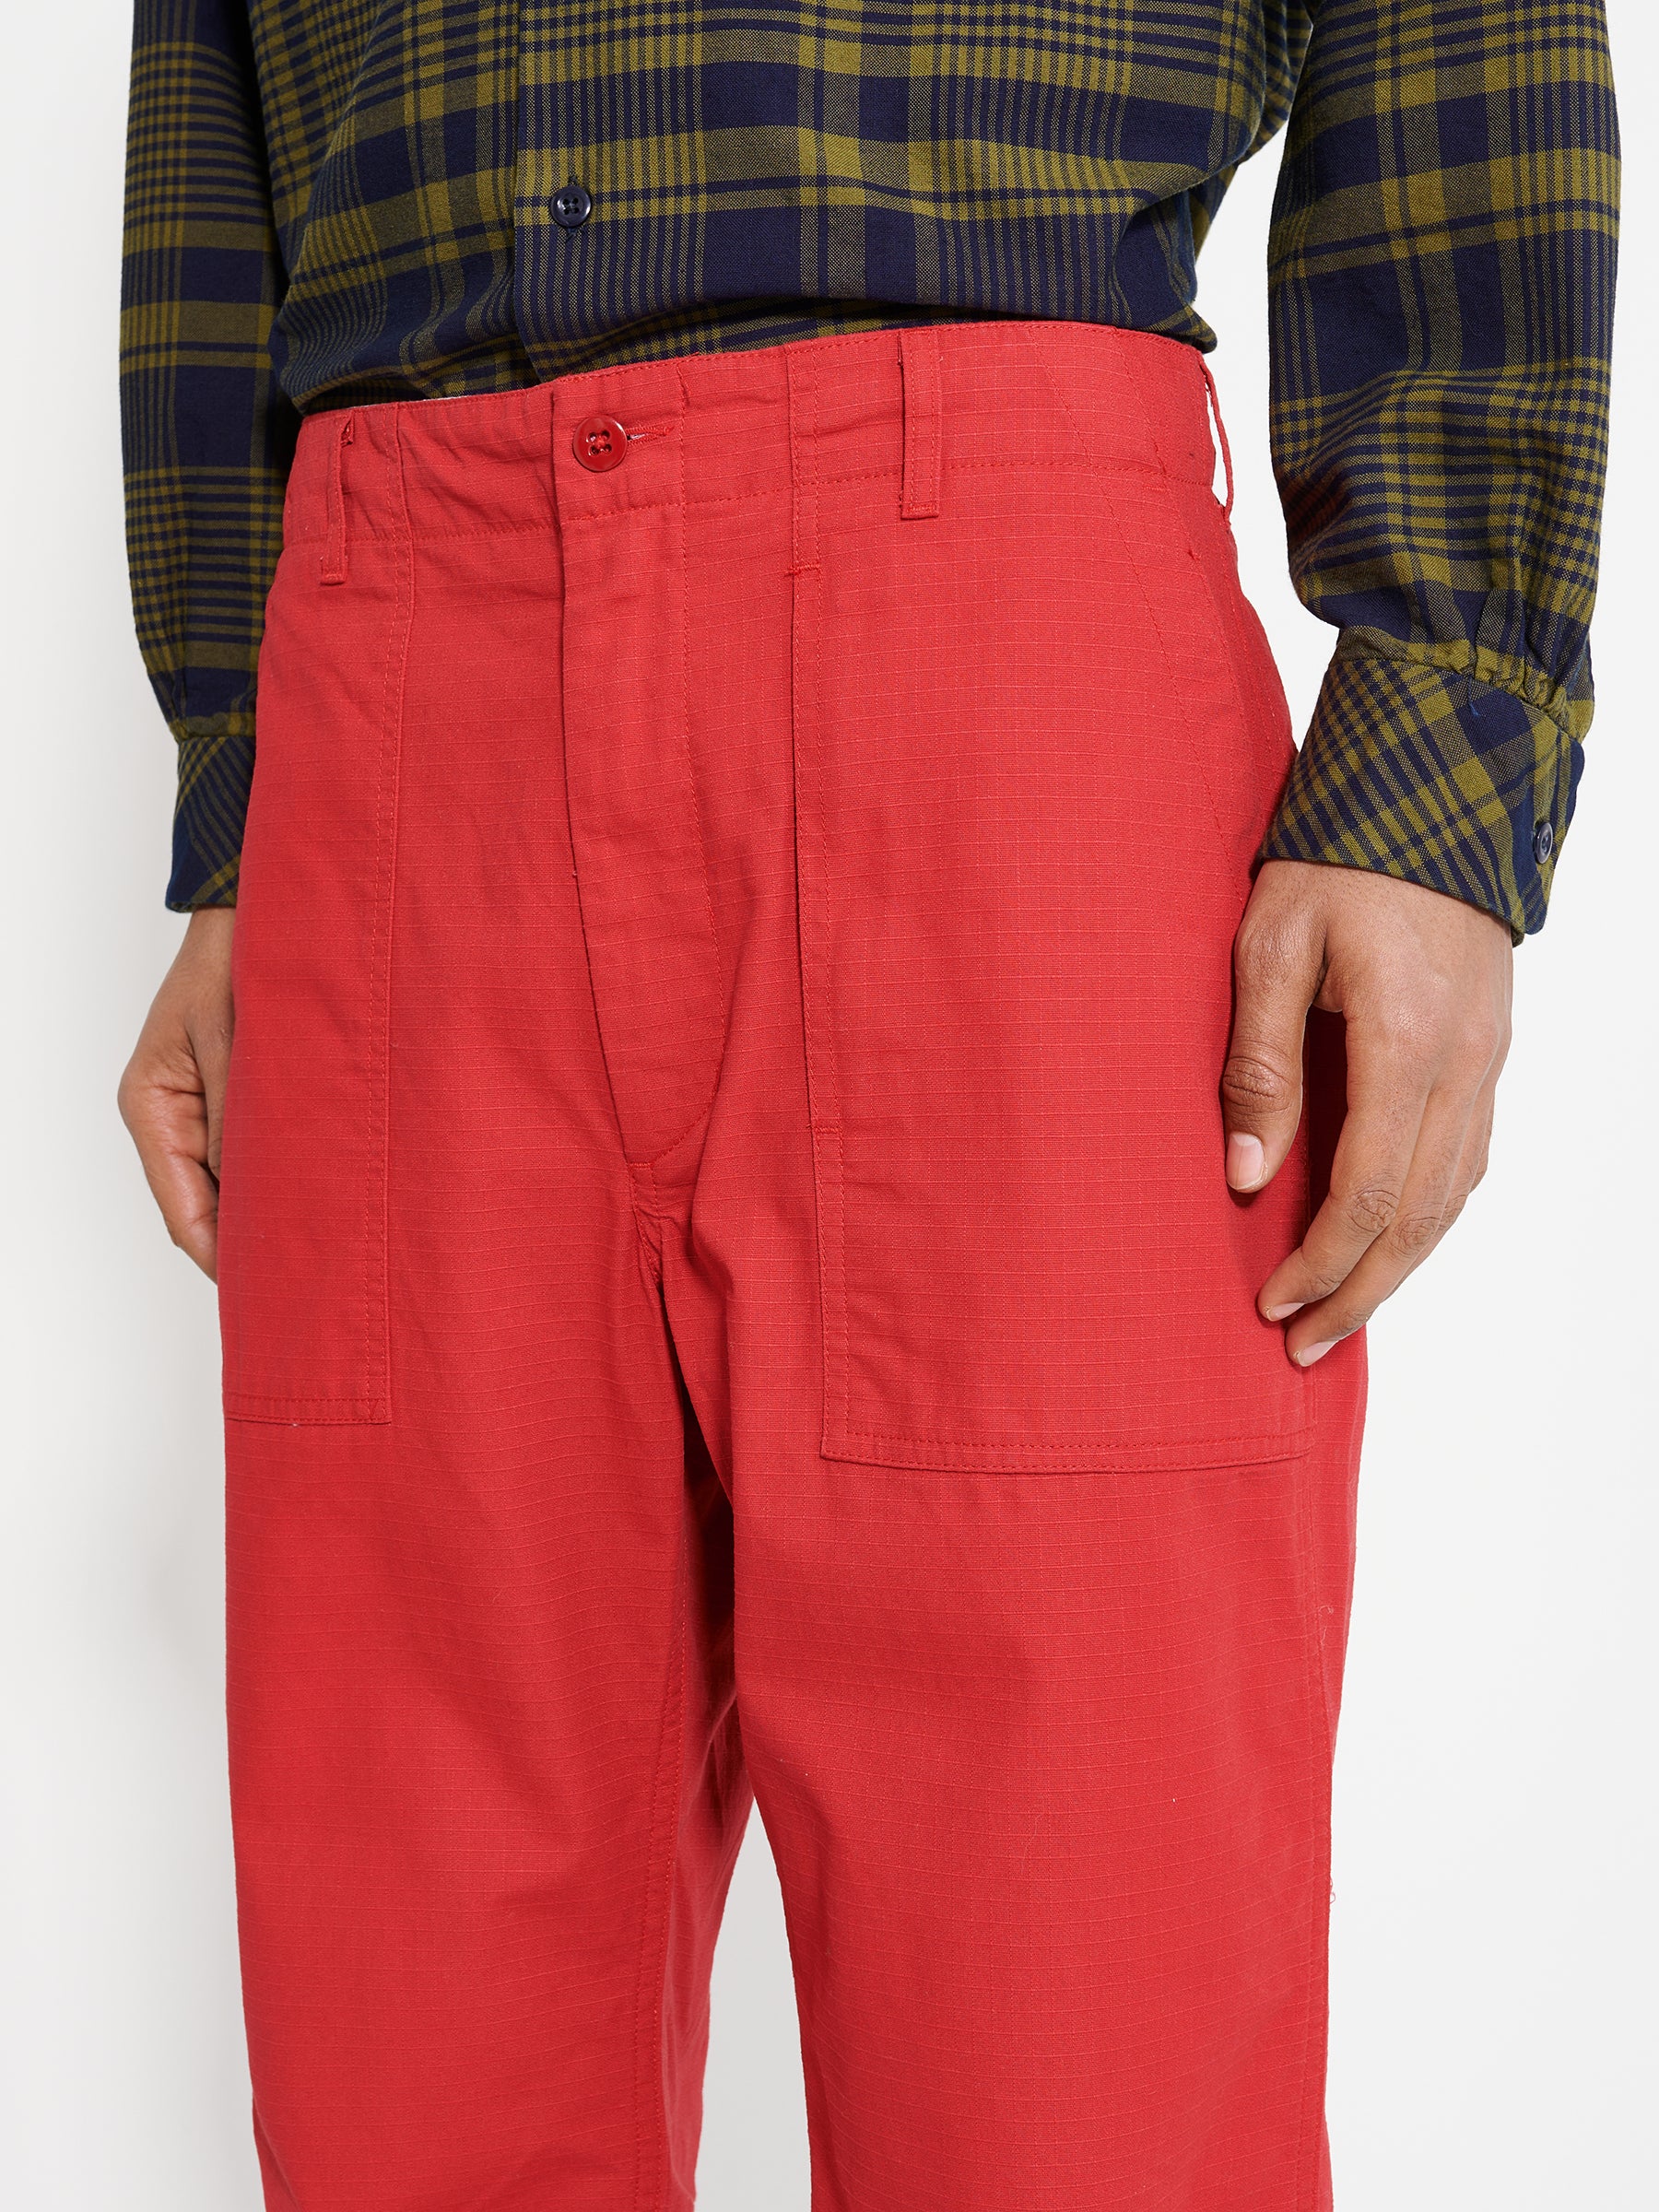 Engineered Garments Fatigue Pant Red Cotton Ripstop